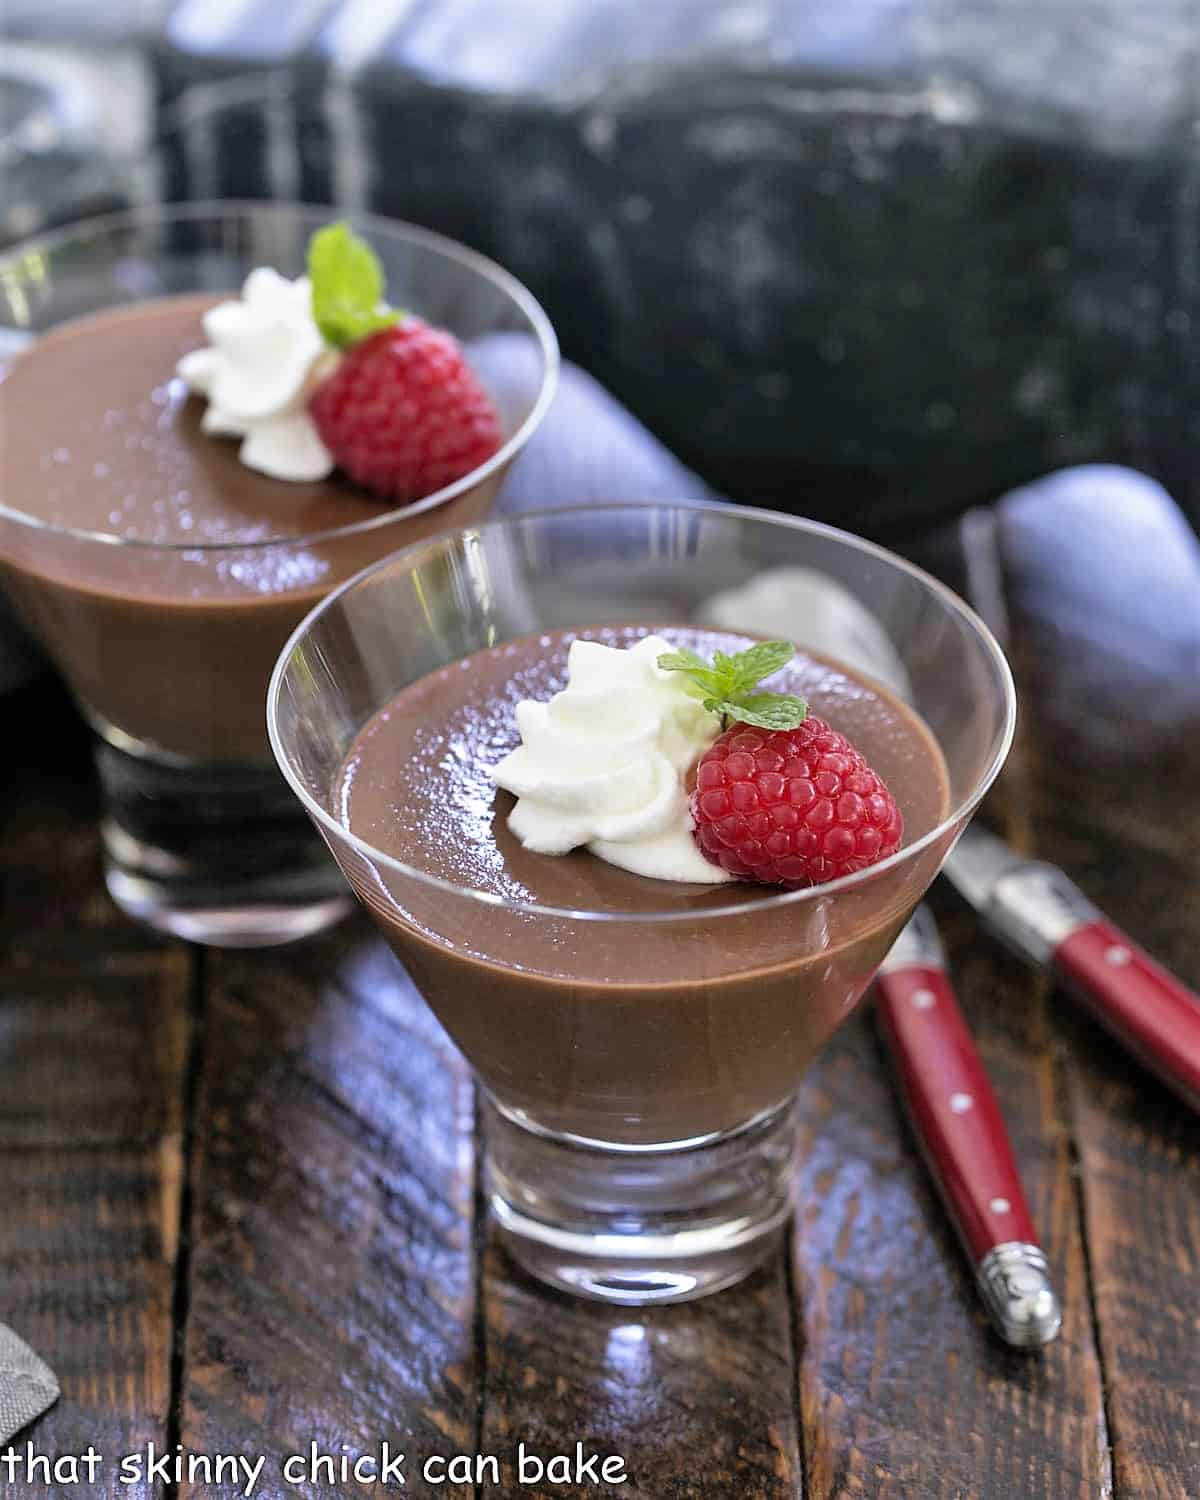 Italian chocolate pudding in 2 glass dishes topped with whipped cream, raspberries and mint